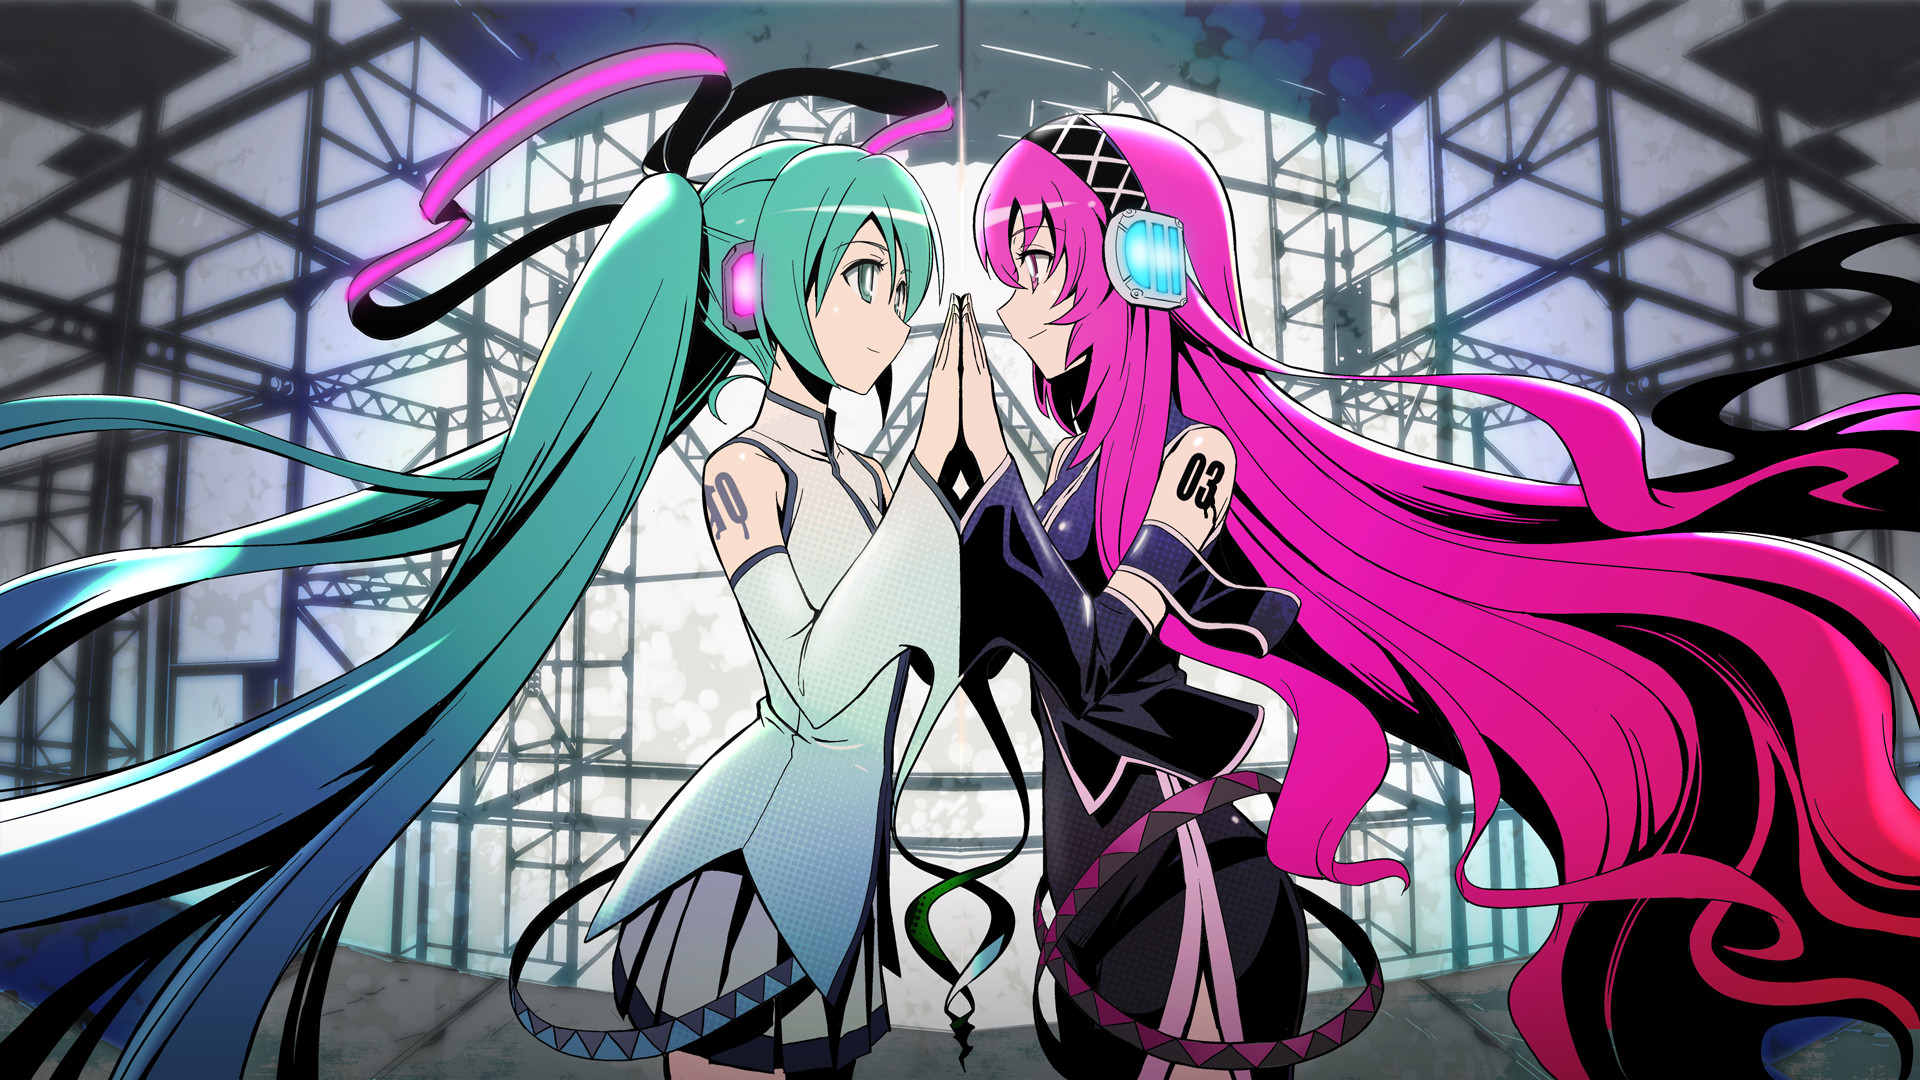 1920x1080 Vocaloid HD Wallpapers | Wallpapers, Backgrounds, Images, Art Photos.